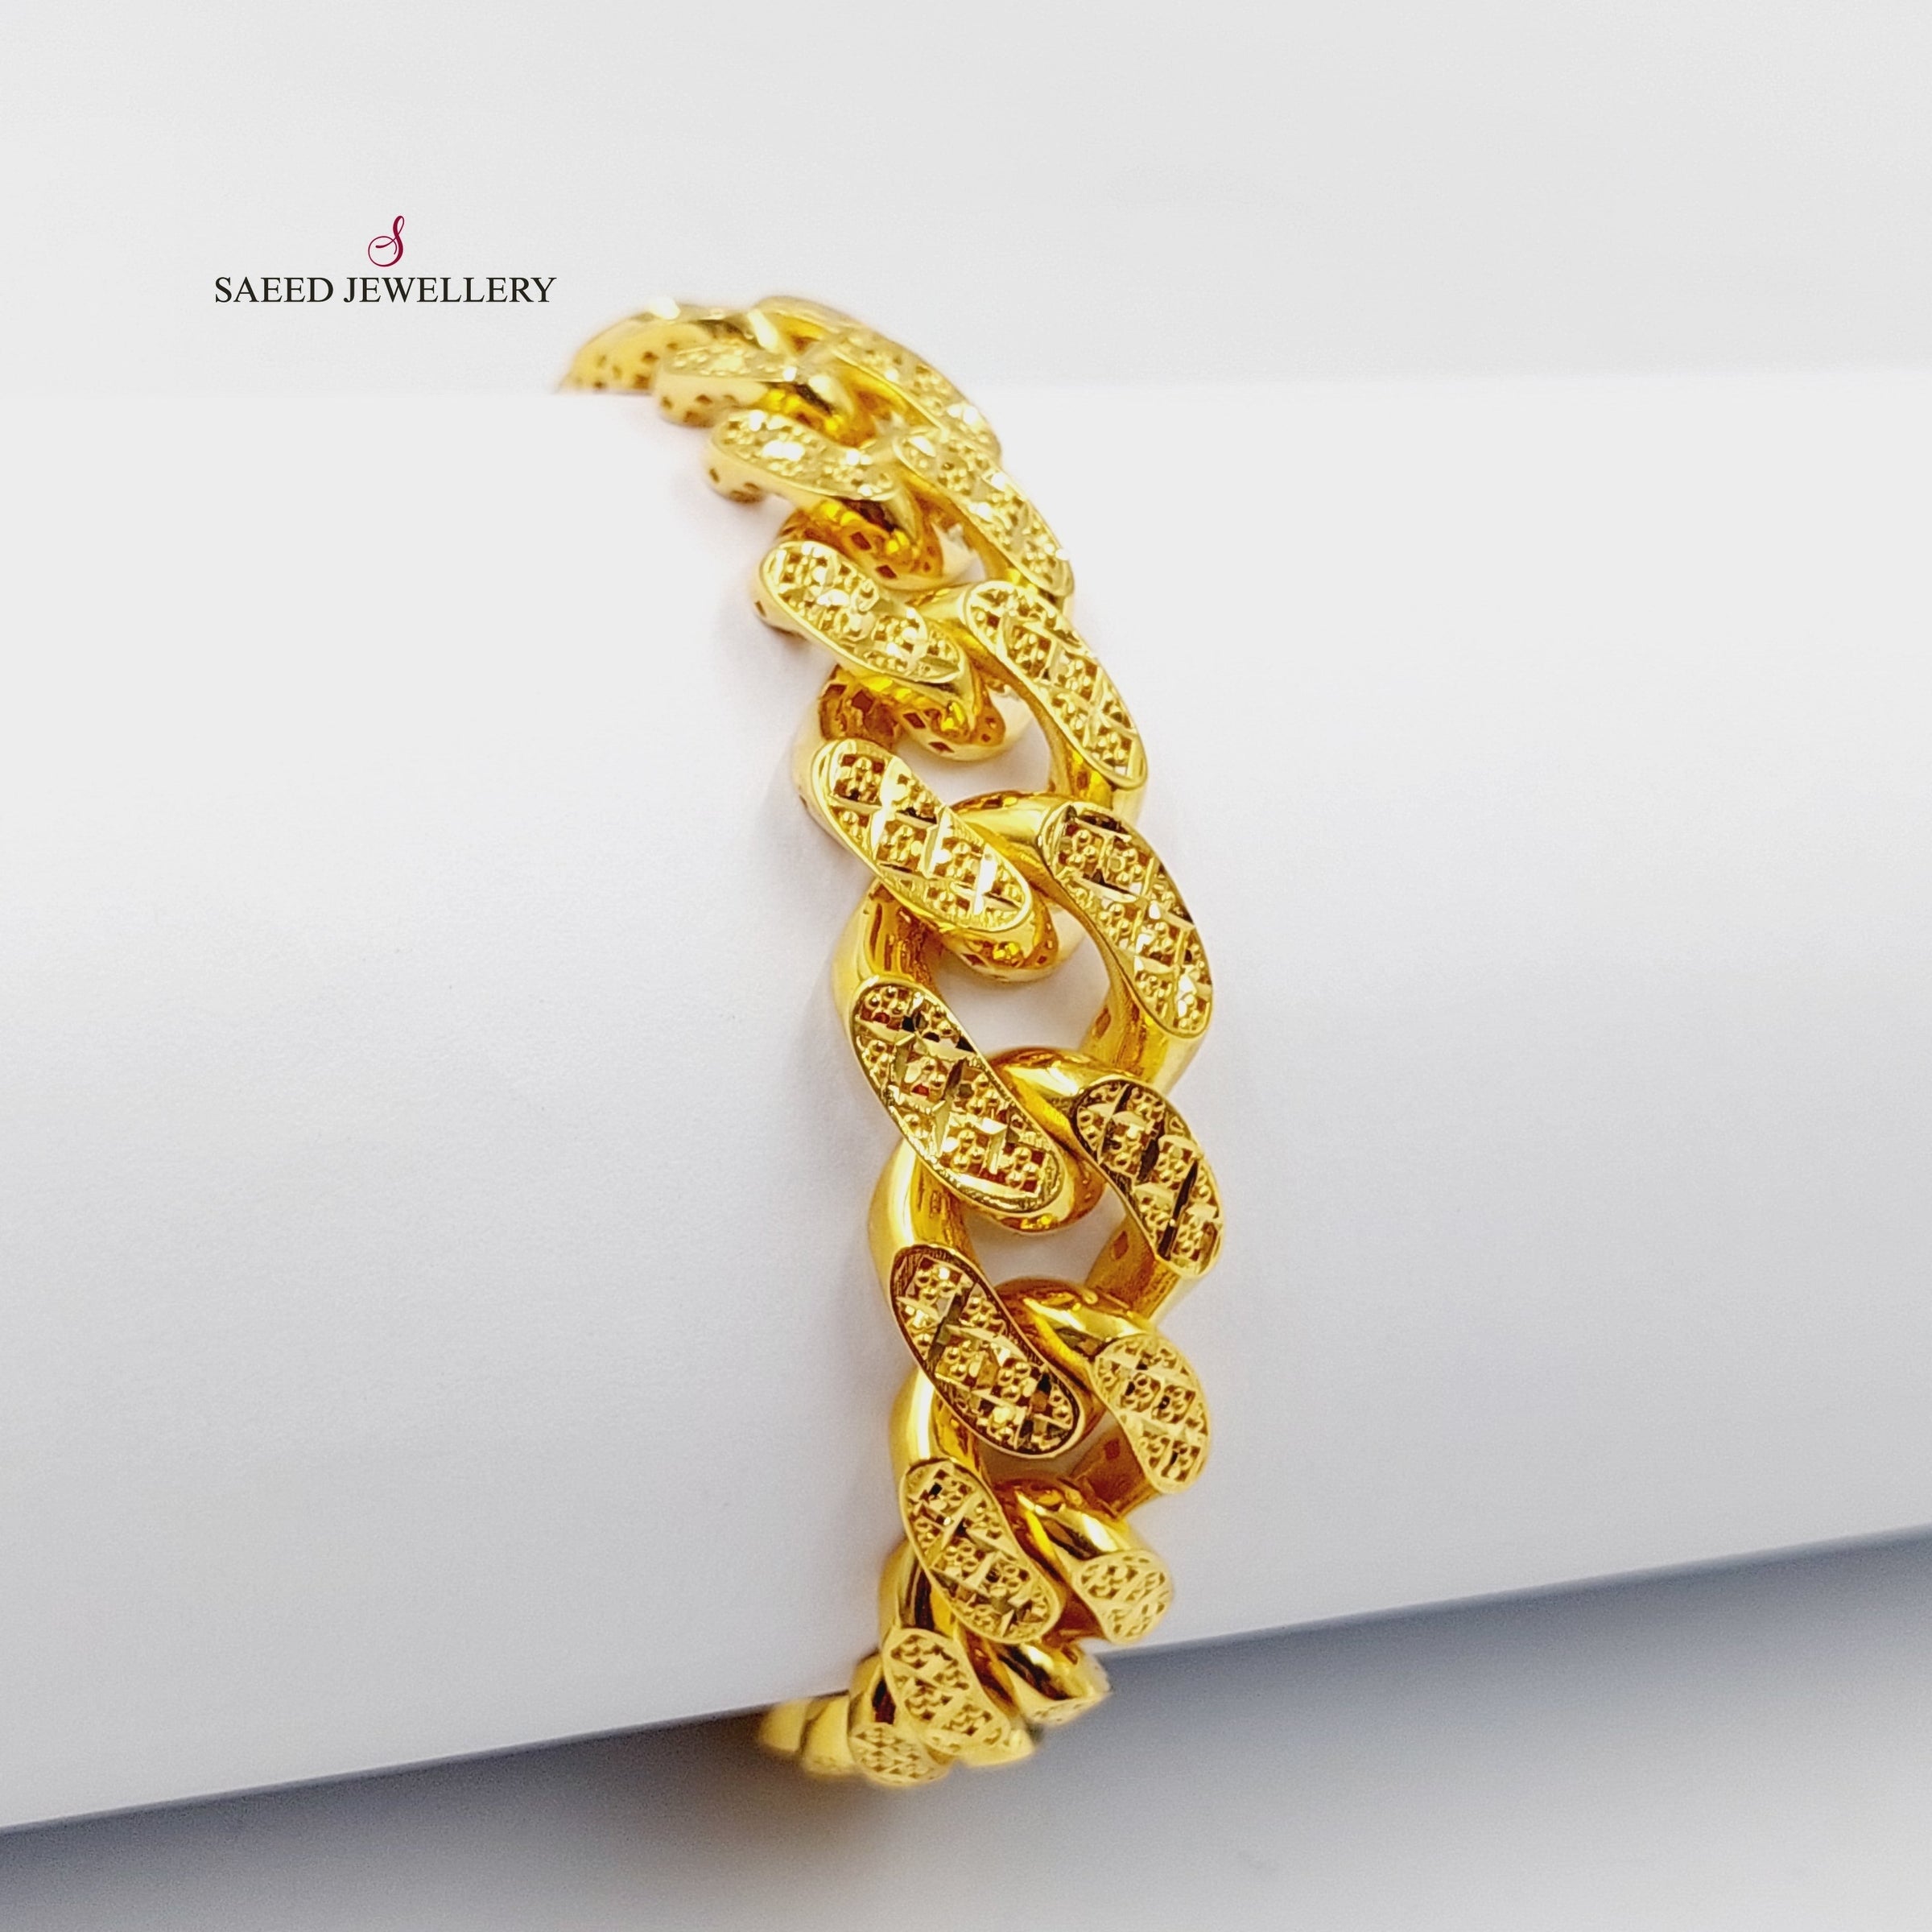 Cuban Links Bracelet  Made of 21K Yellow Gold by Saeed Jewelry-31067